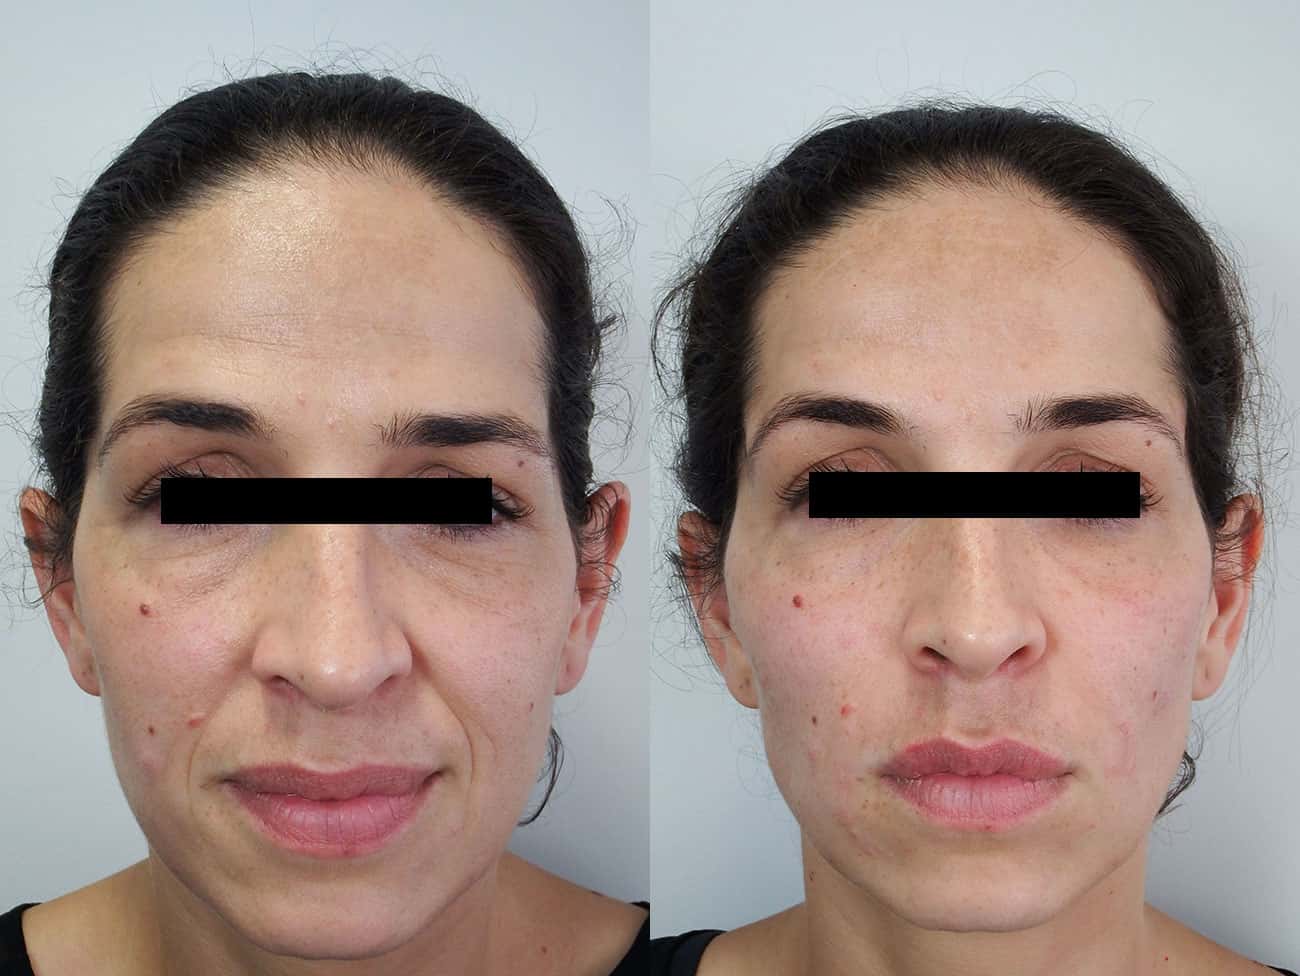 Bags Under Eyes - Causes, Fixes and Surgery Free Treatment - Auckland NZ - Palm Clinic